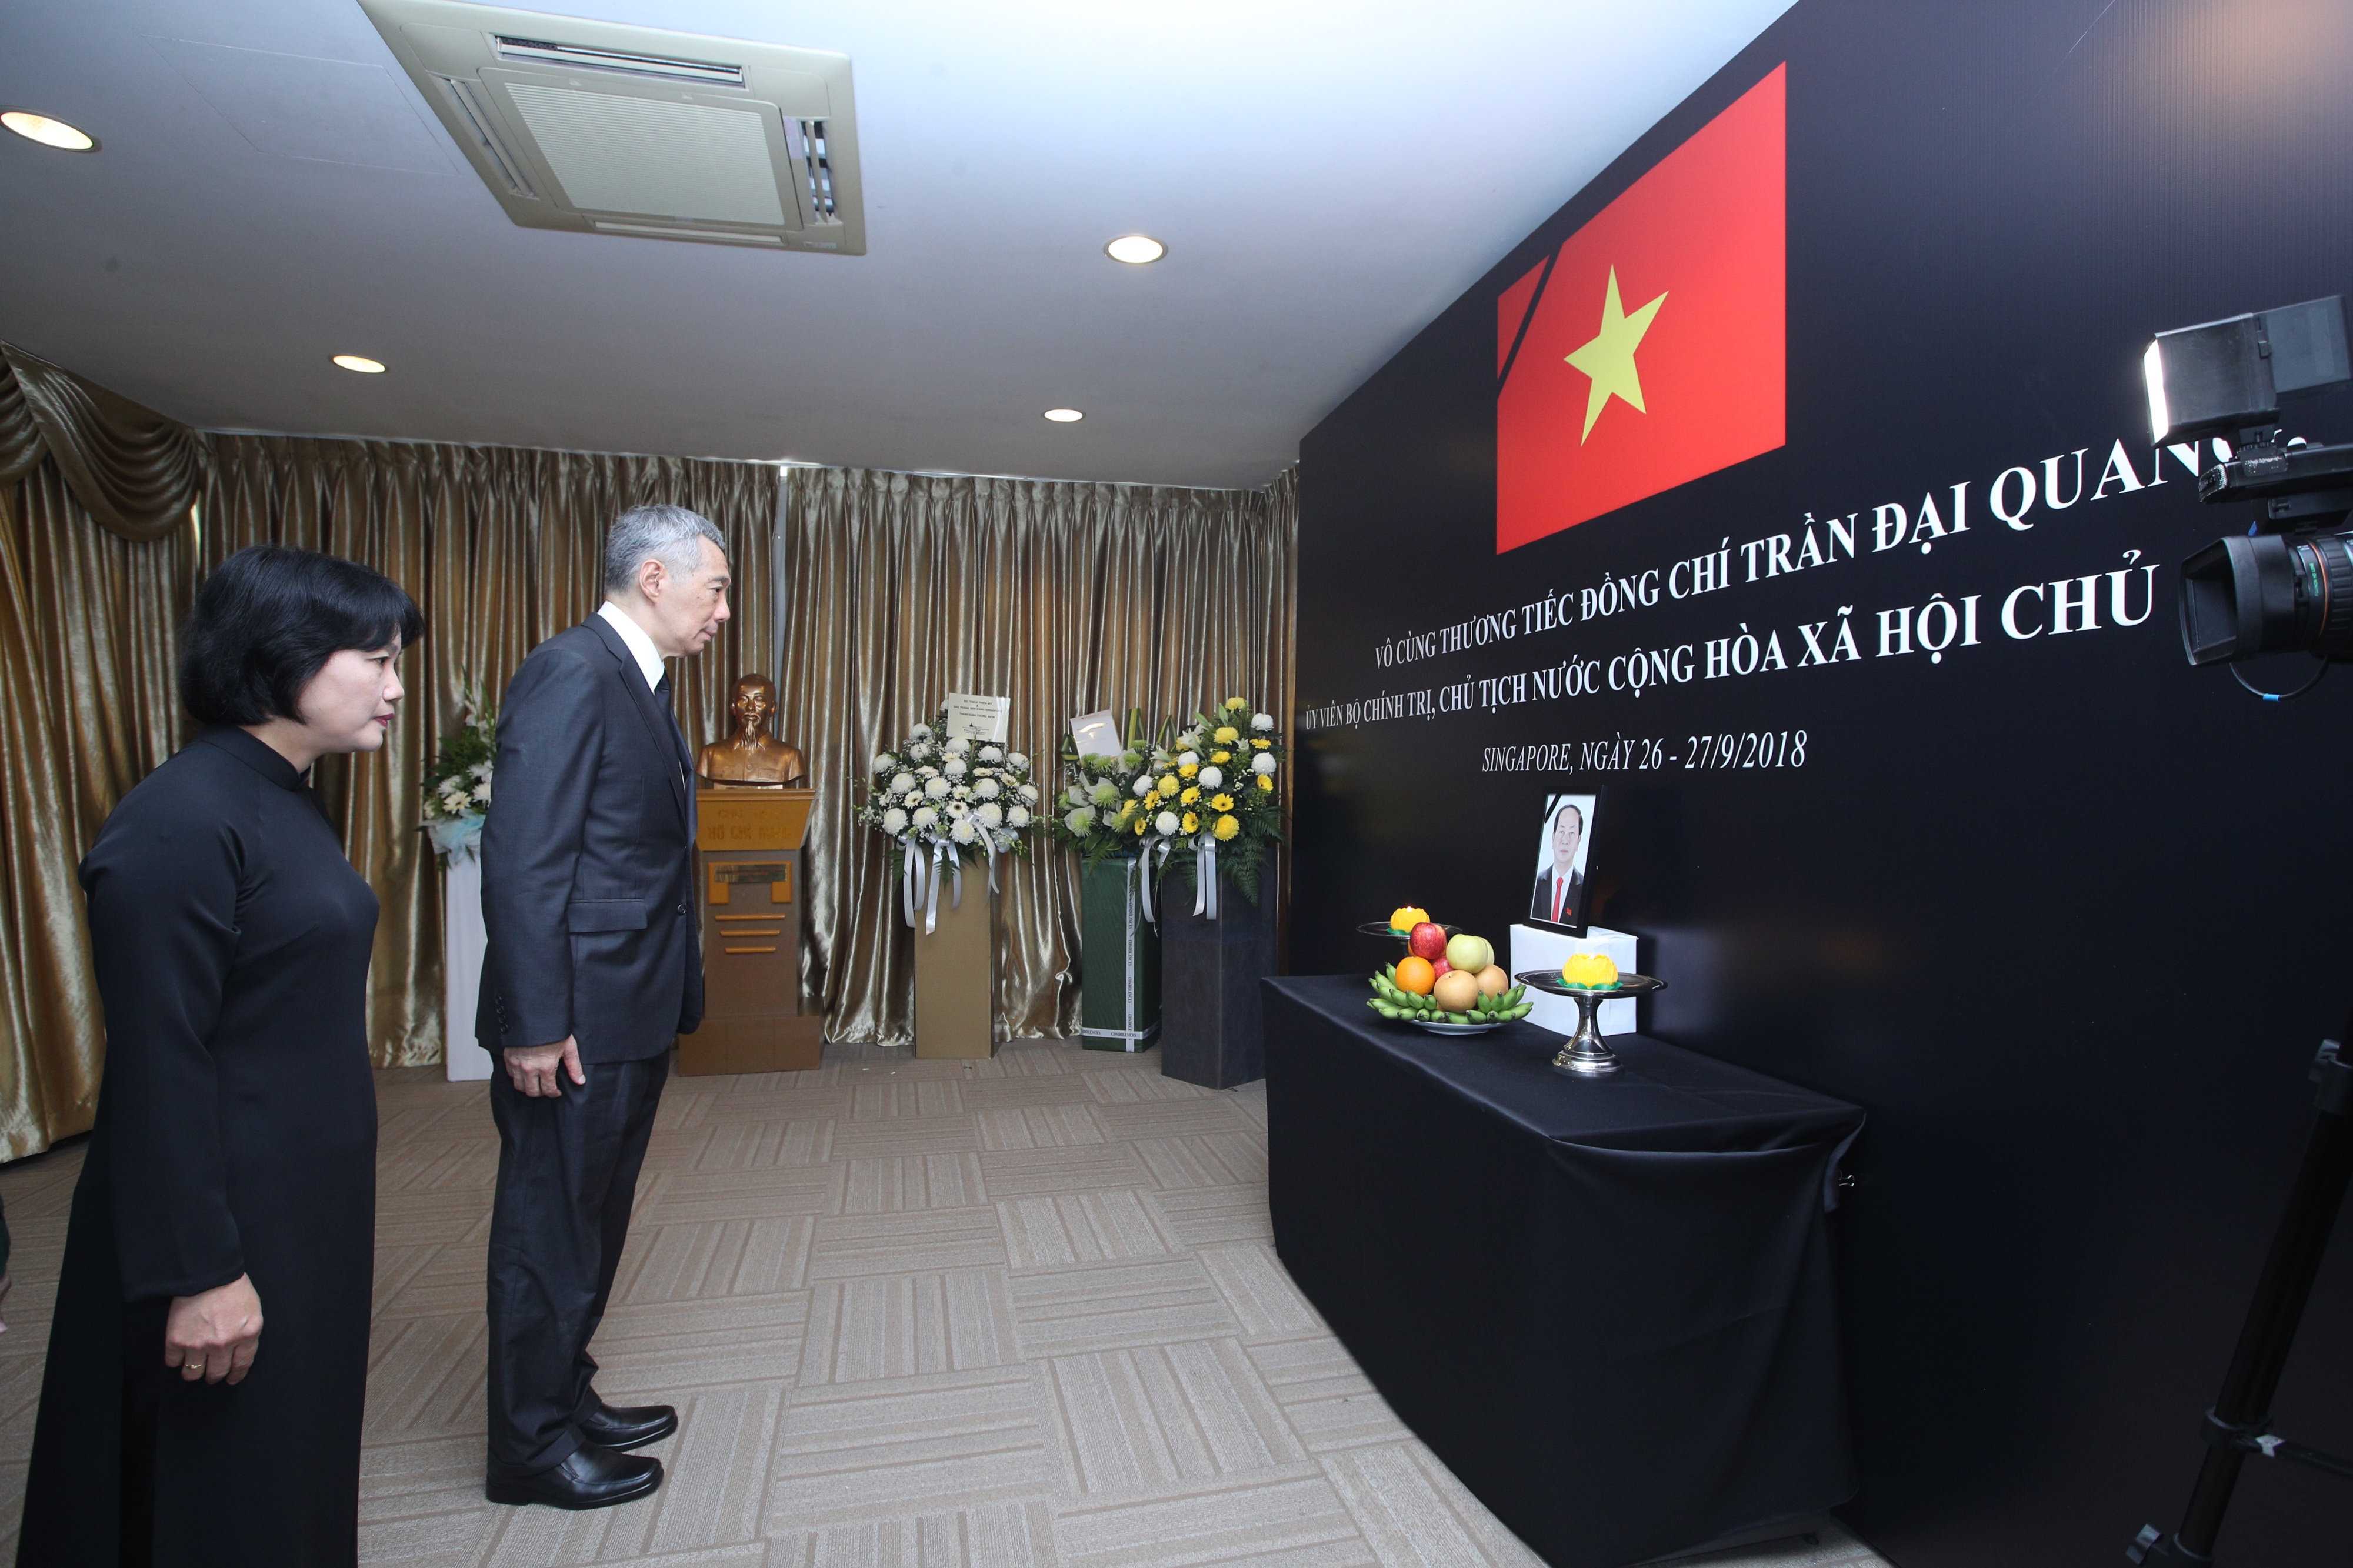 PM Lee Hsien Loong offering condolences for Vietnam President Tran Dai Quang at the Vietnam Embassy on 26 Sep 2018.